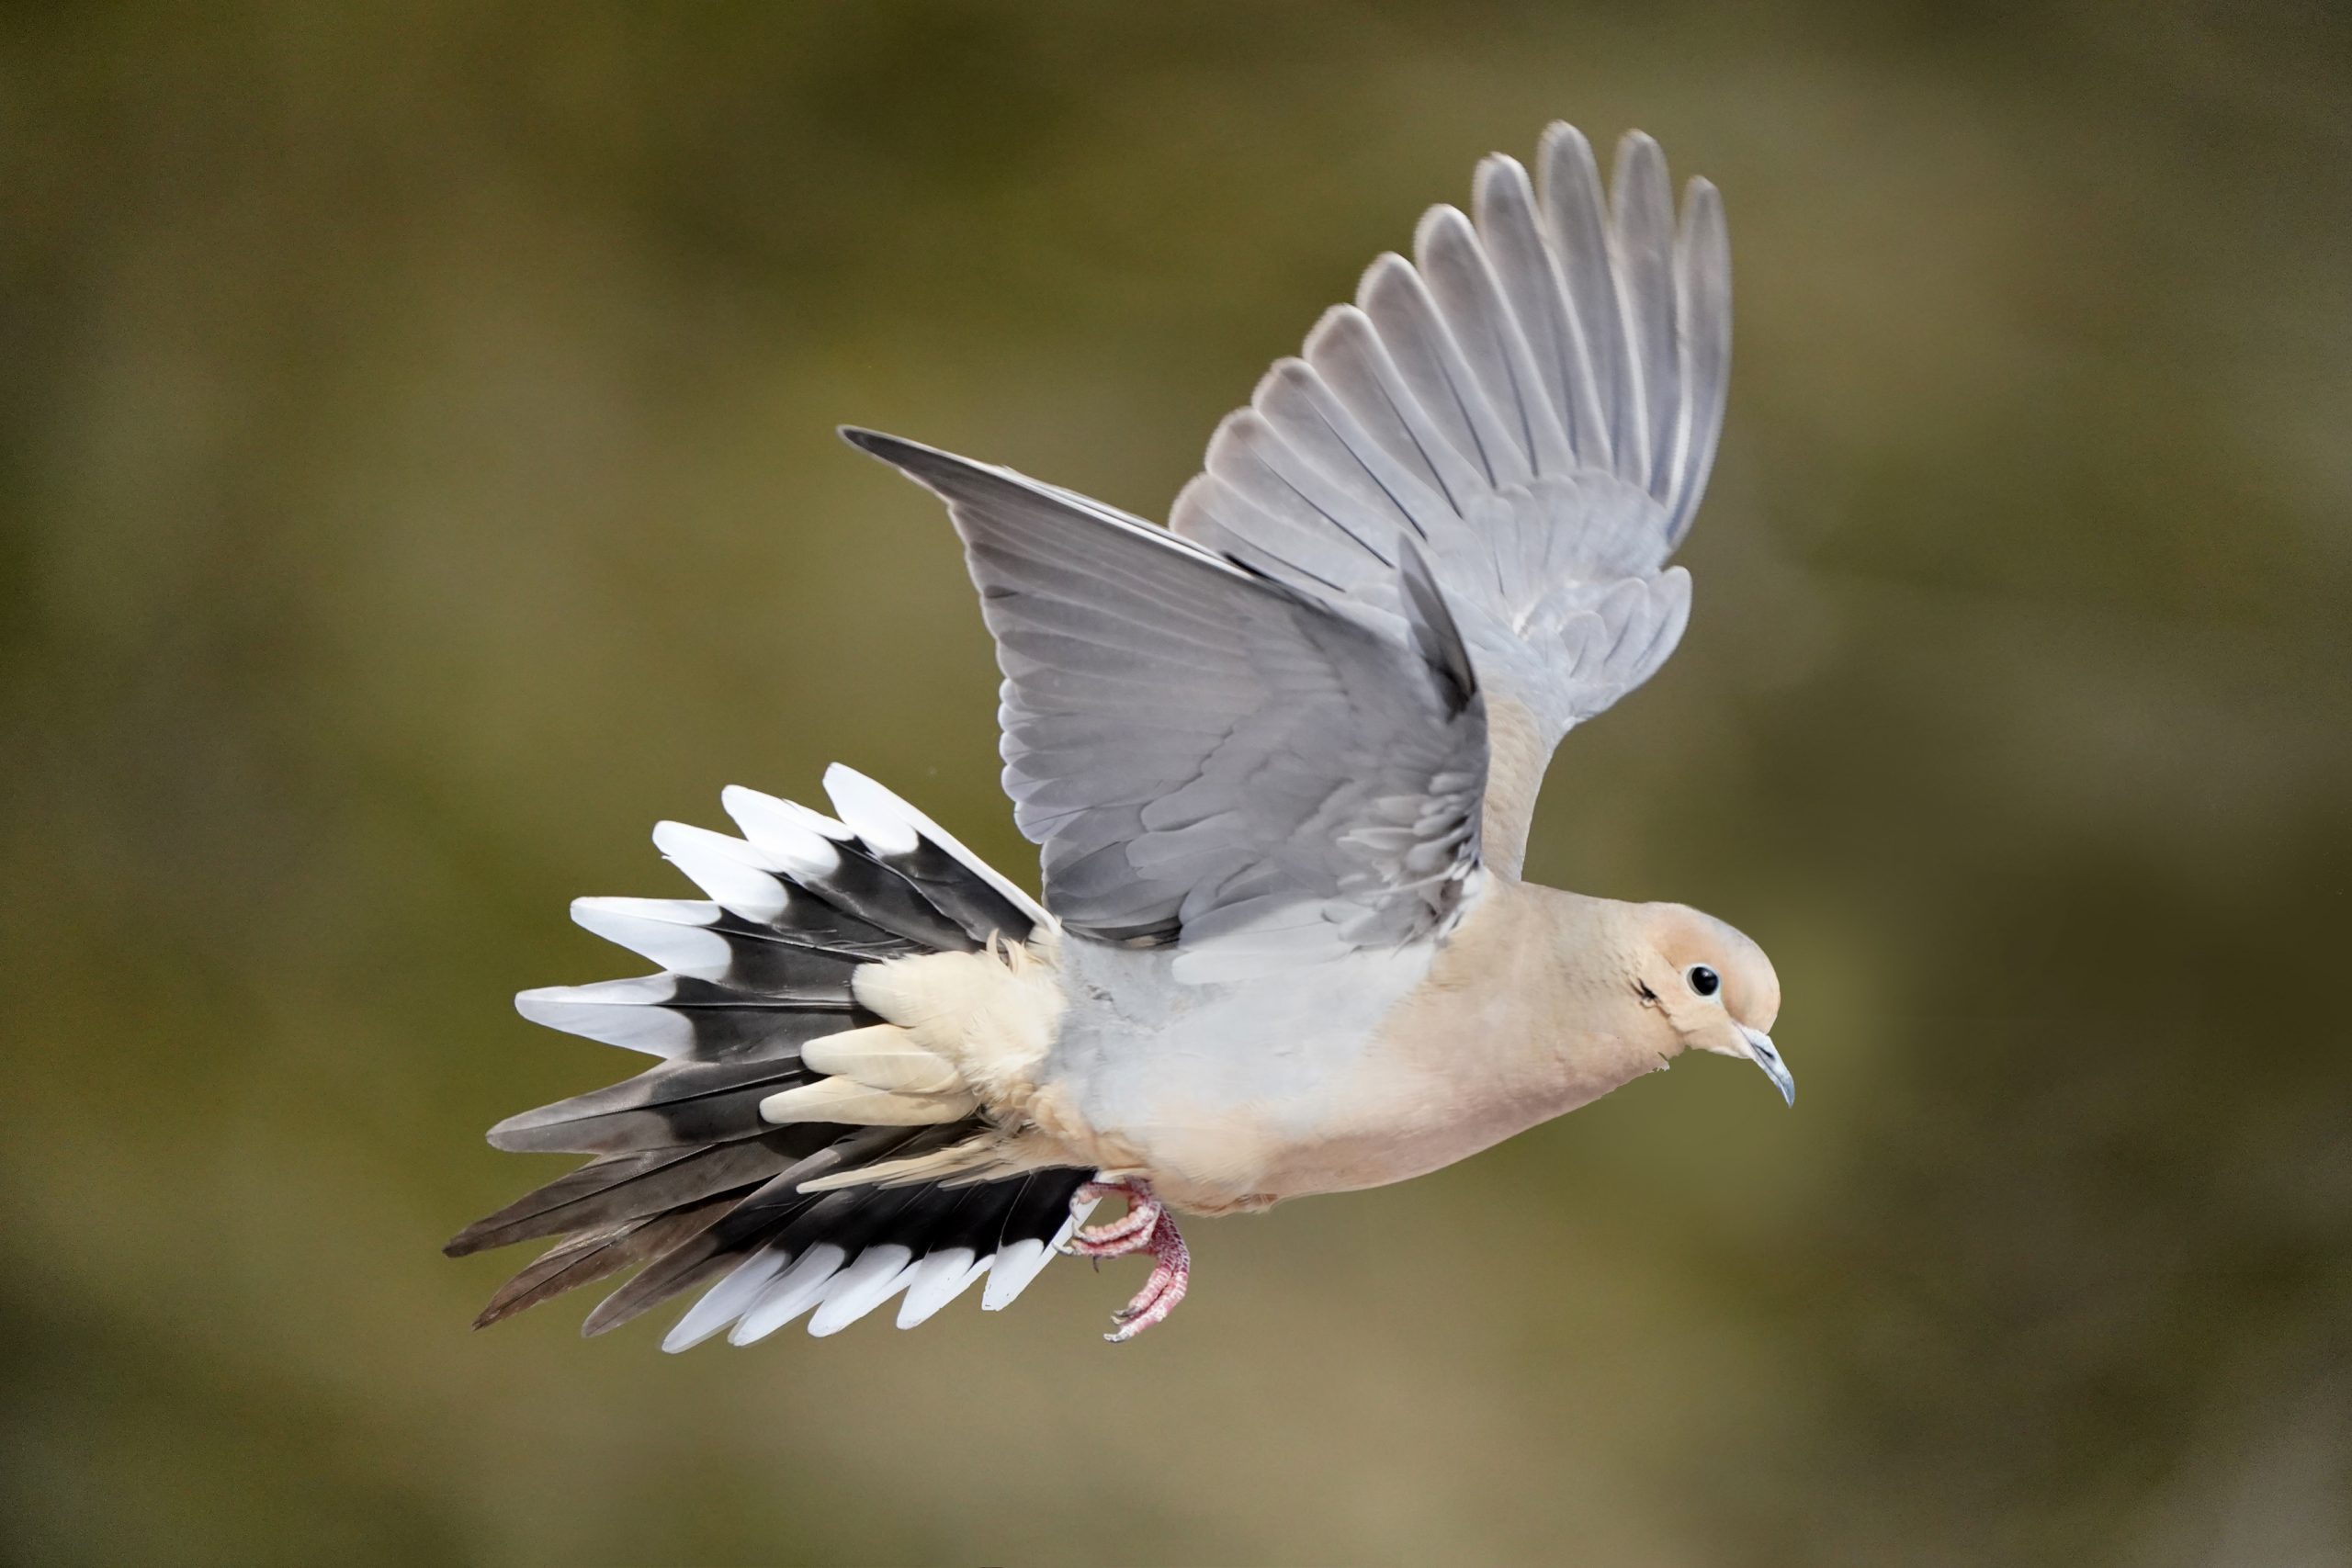 Do Mourning Dove Feathers and Wings Make Noise?